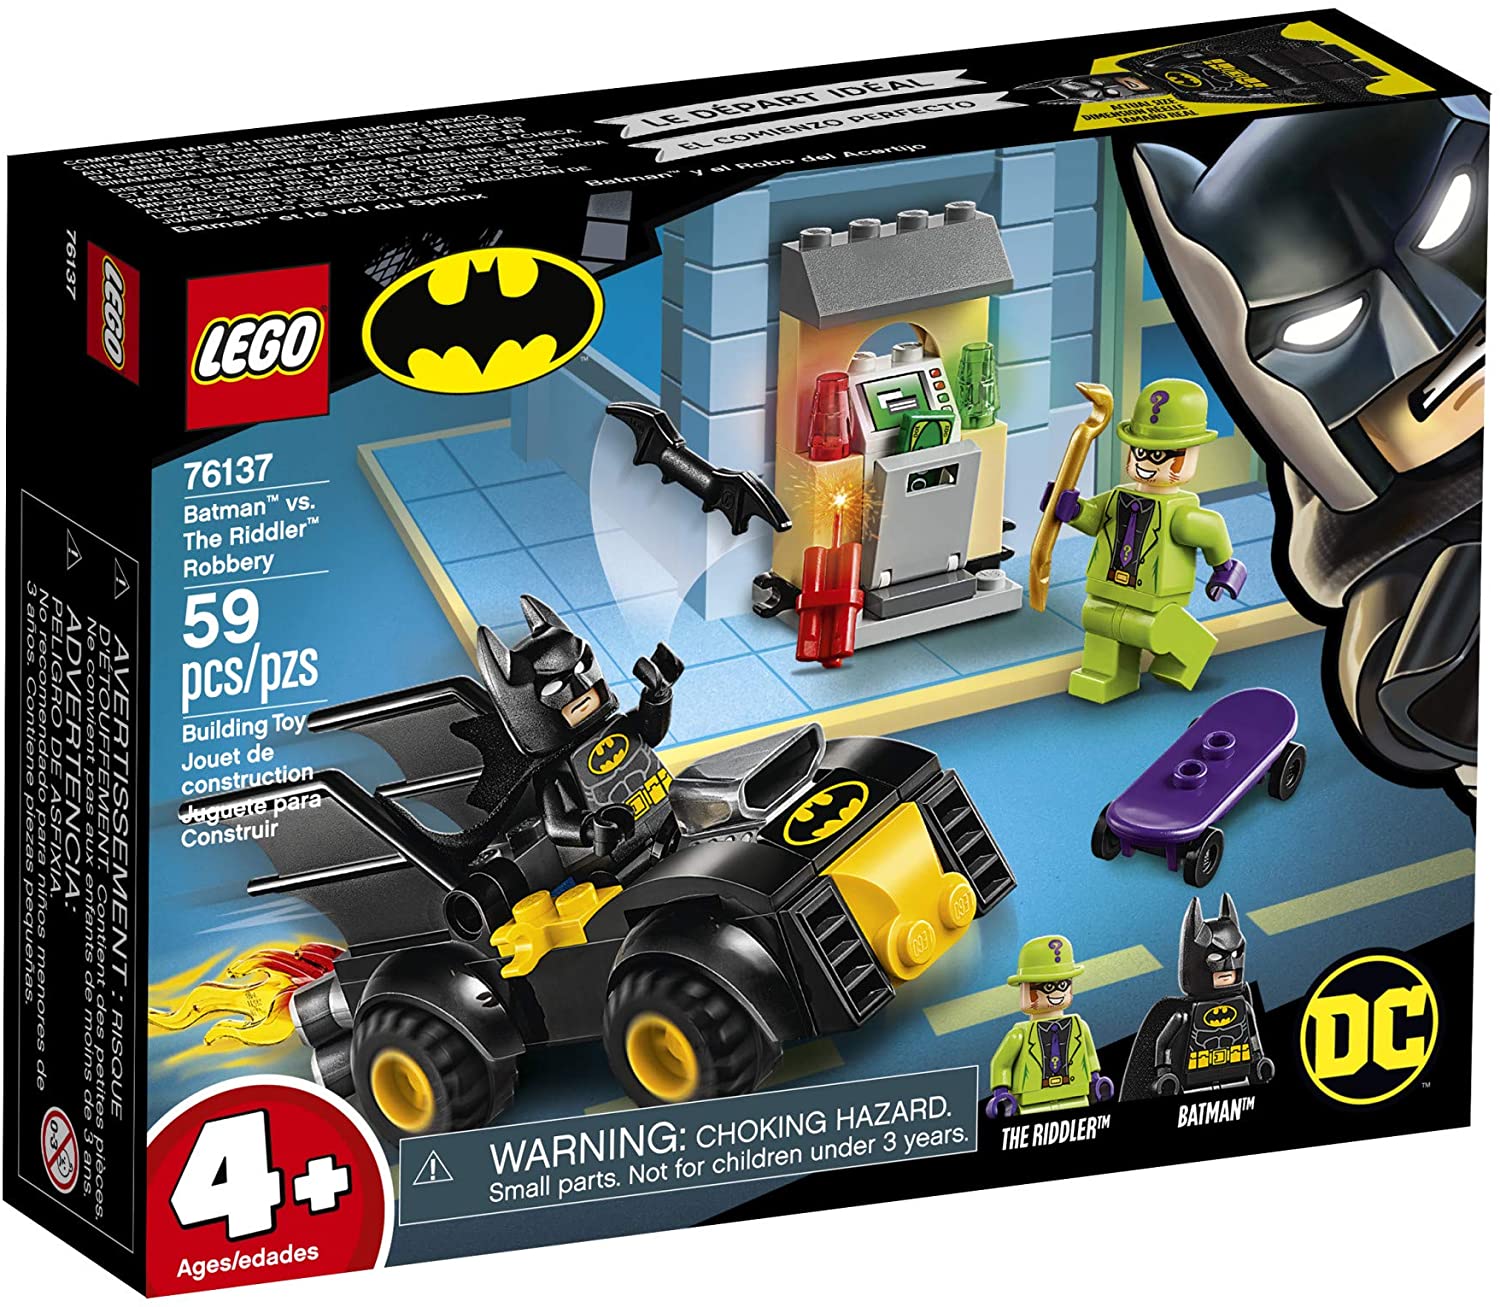 LEGO Aged 4 Plus Batman Vs The Riddle Robbery Kit Of 59 Piece Sets